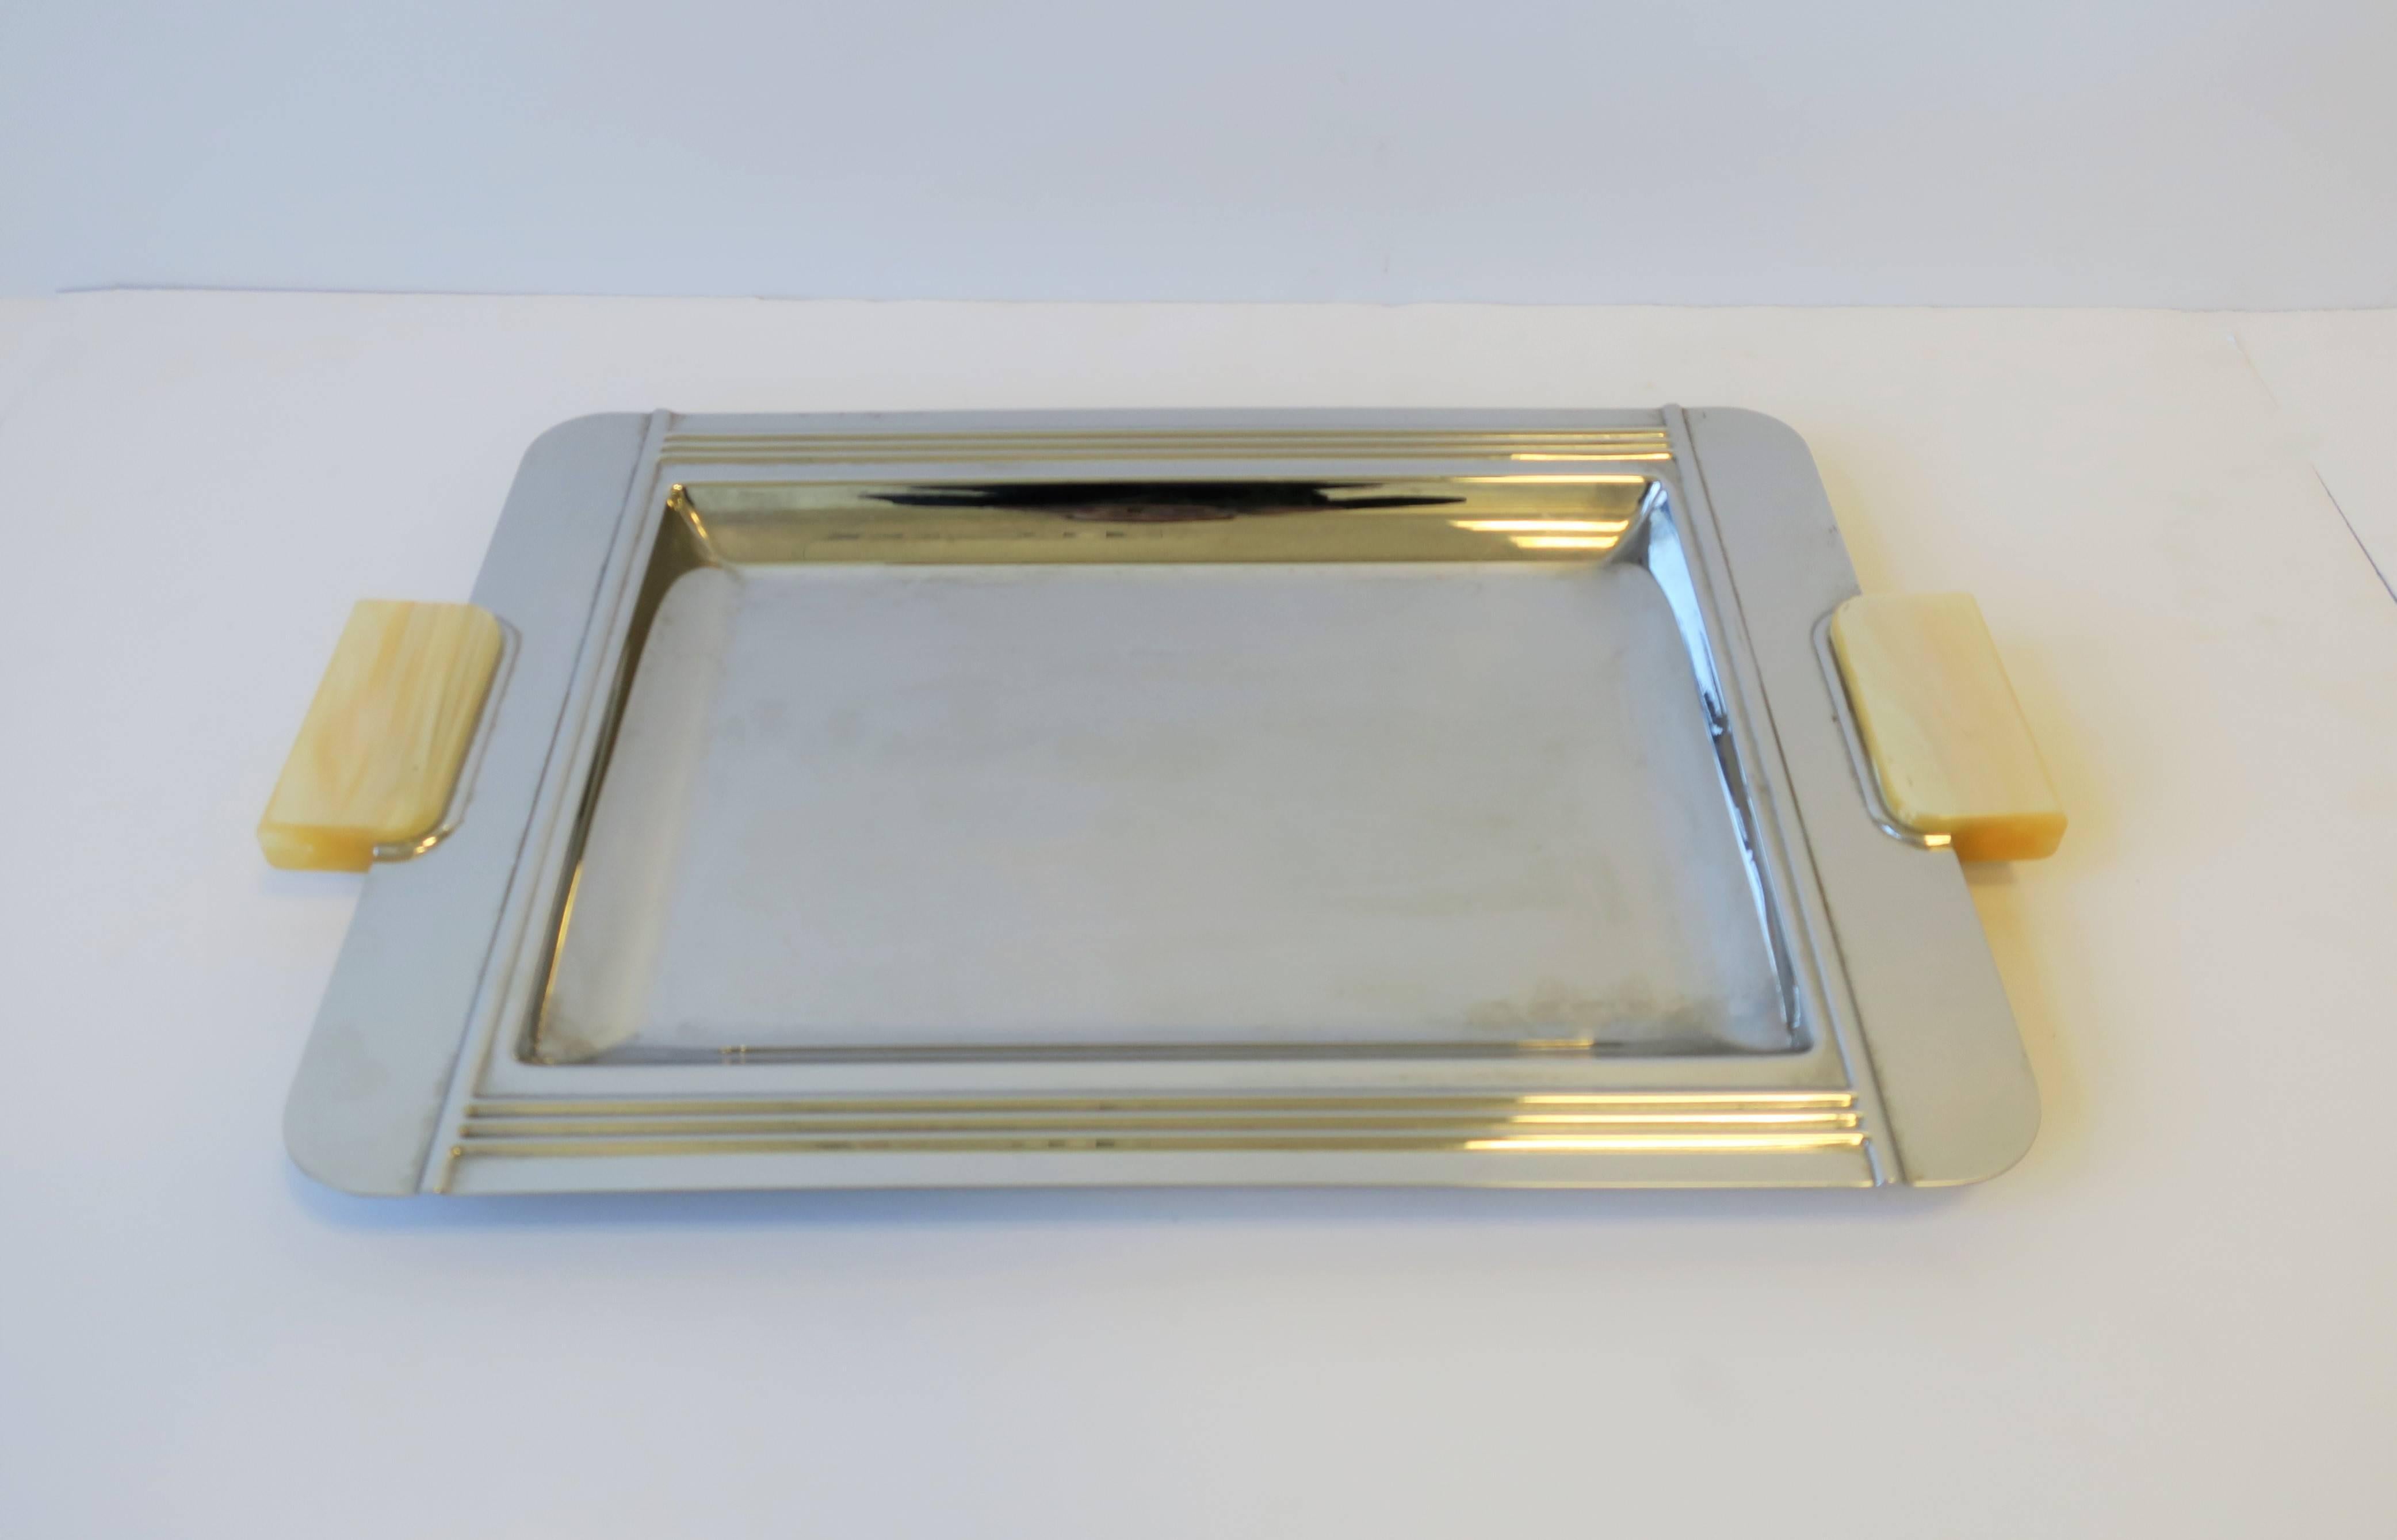 A beautiful French Art Deco style chrome serving tray. Tray has iconic Art Deco lines and beautiful cream colored resin handles. Vintage onyx coaster set featured also available for purchase, search ref. no.: LU131428847663

Tray measures: 11.25 in.